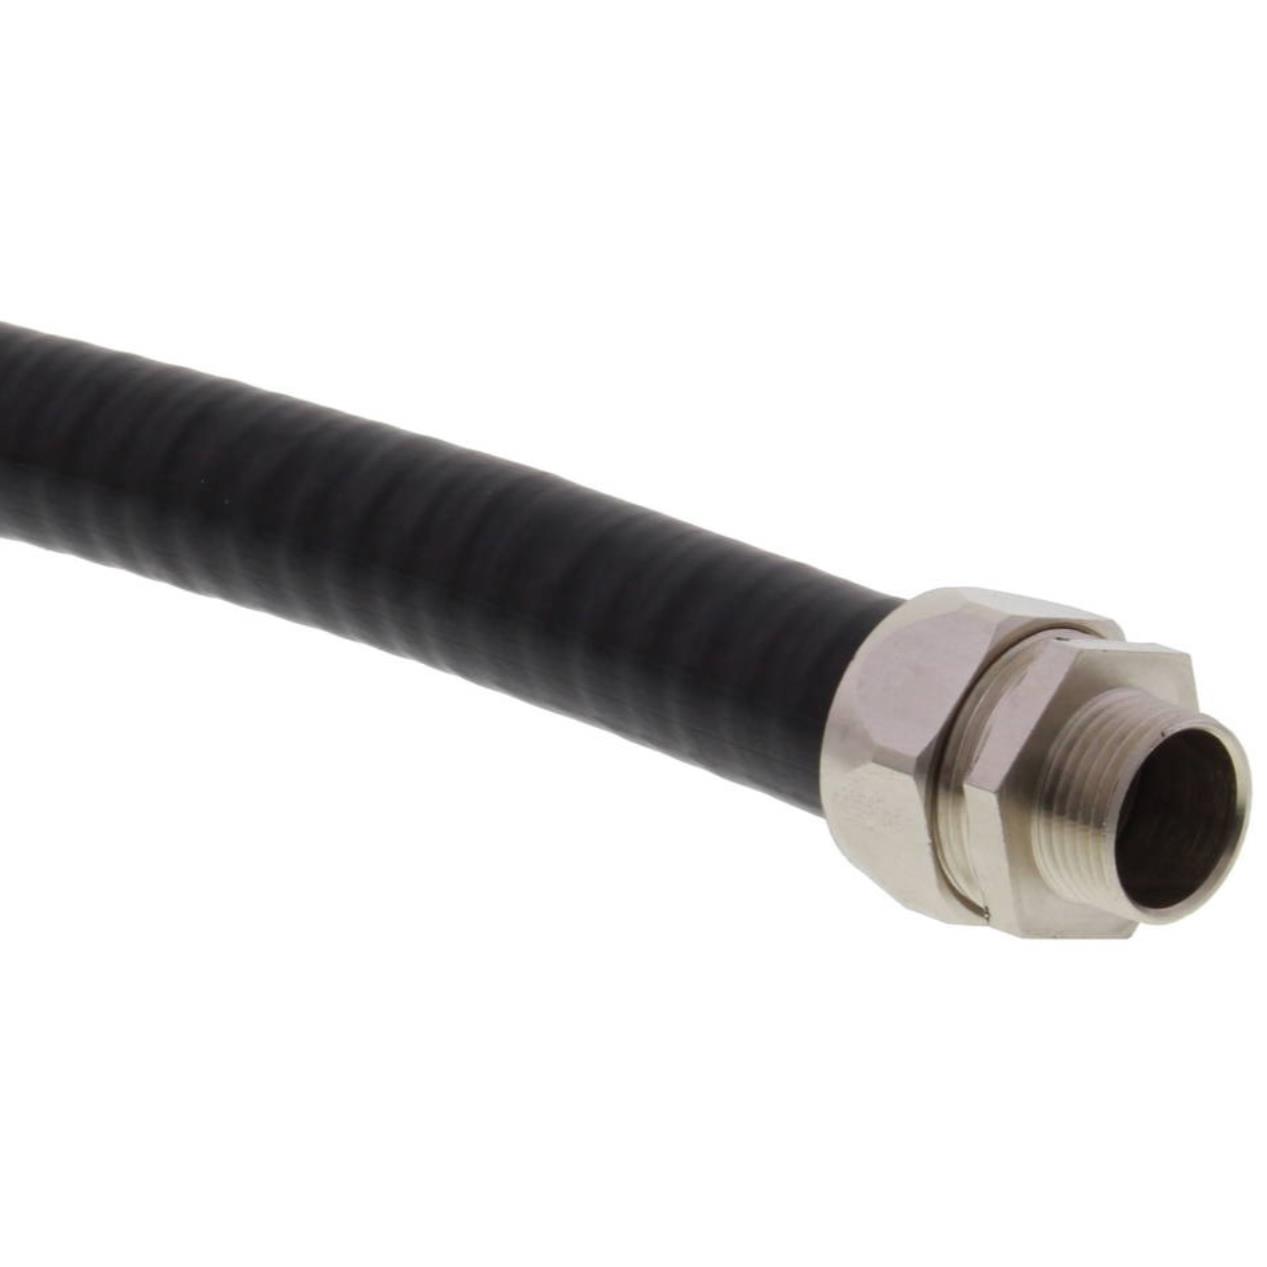 【BMCG-PVC-S-12-BK】T-CONNECTOR FOR CORRUGATED PIPES